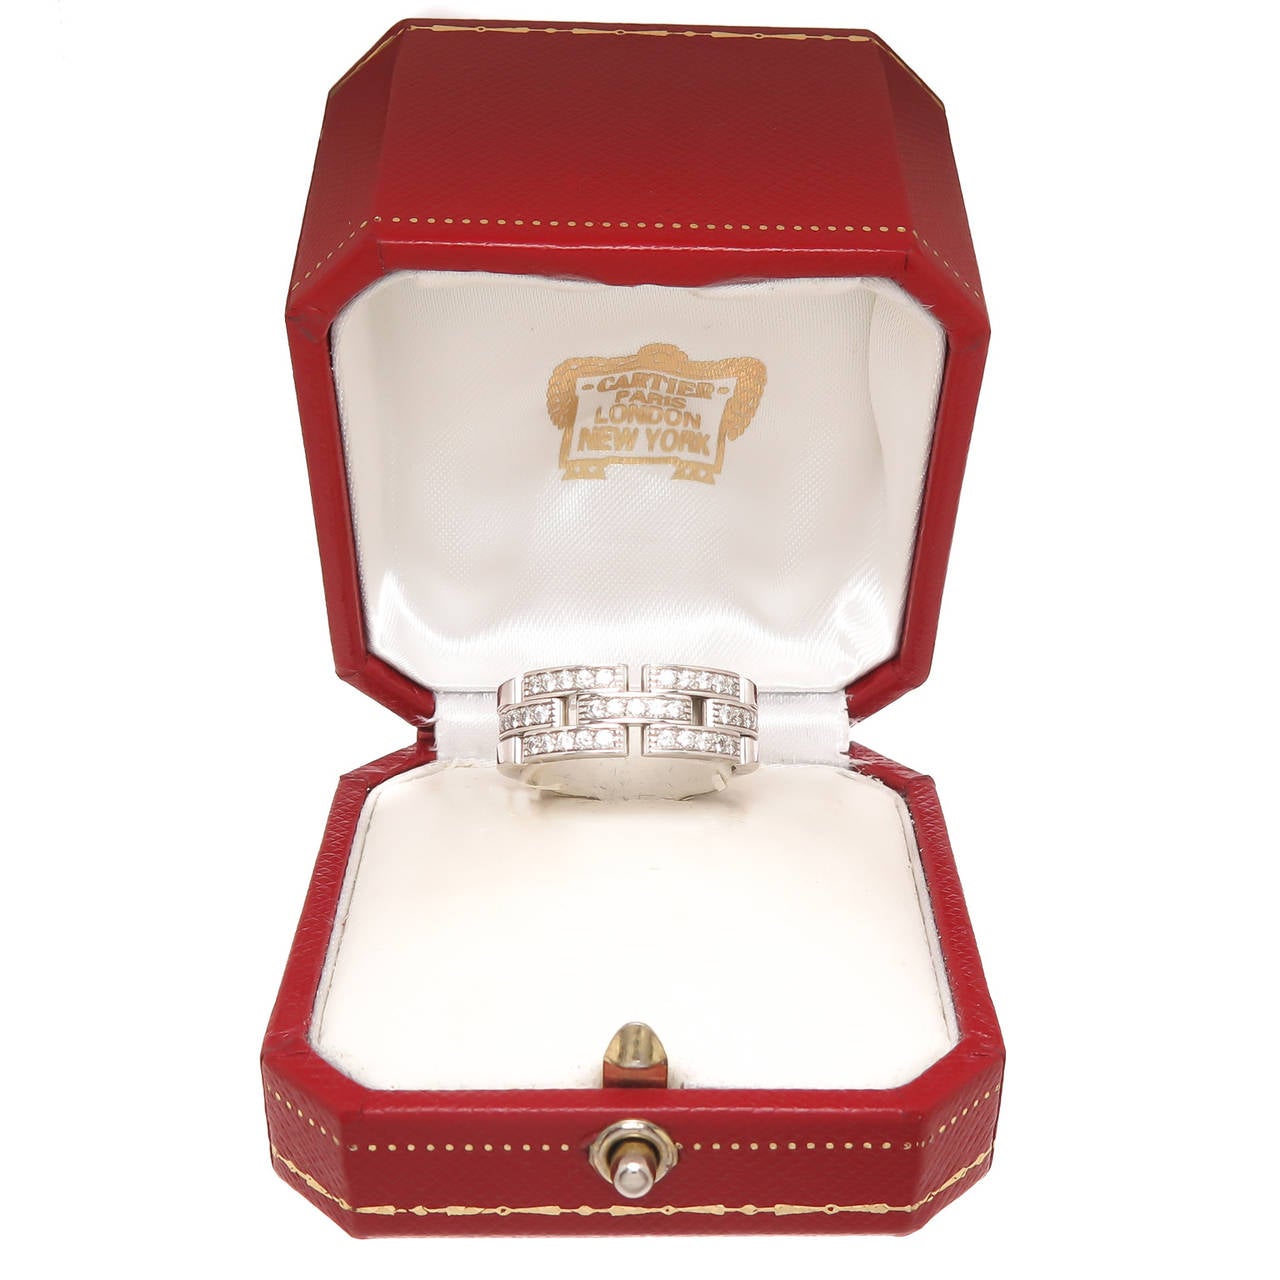 Cartier 18K White Gold and Diamond Ring from the Maillon Panthere De Cartier Collection. containing 35 round brilliant cut Diamonds totaling approximately 1 carat and grading as F-G in color and VVS in Clarity. Measuring 5/16 inch wide. Finger size